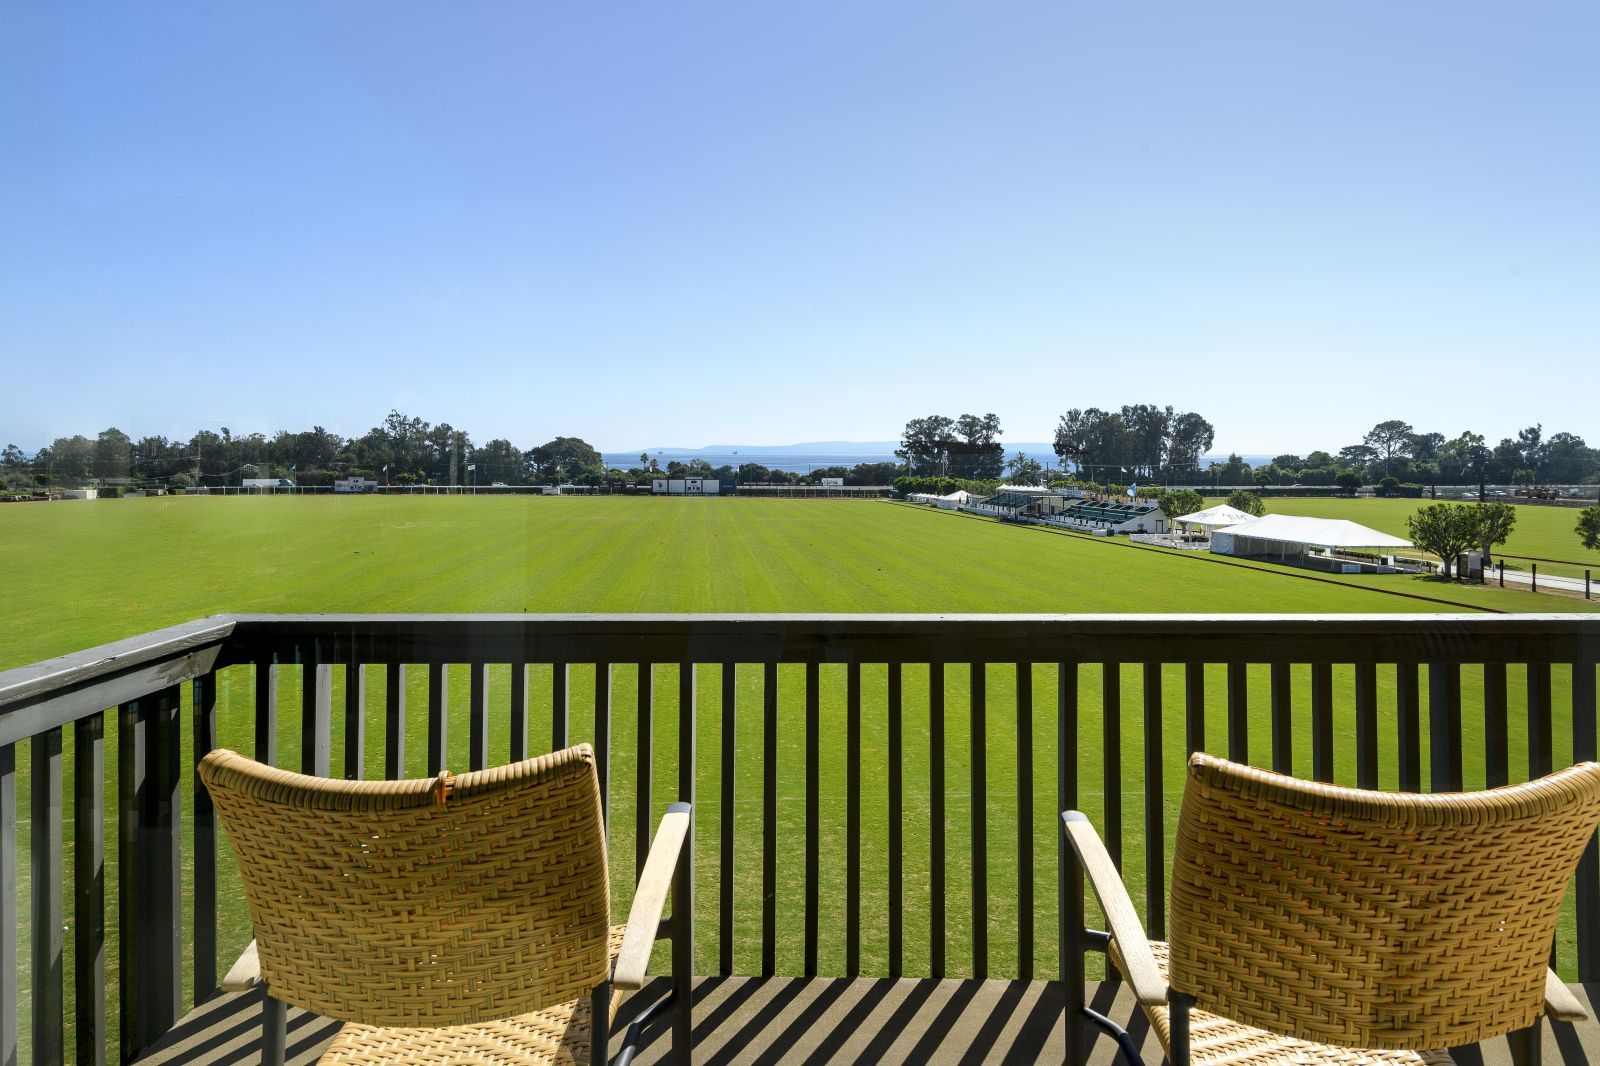 Two lounge chairs on the patio of a luxurious condo that overlooks the Santa Barbara Polo Field with the ocean in the distance.